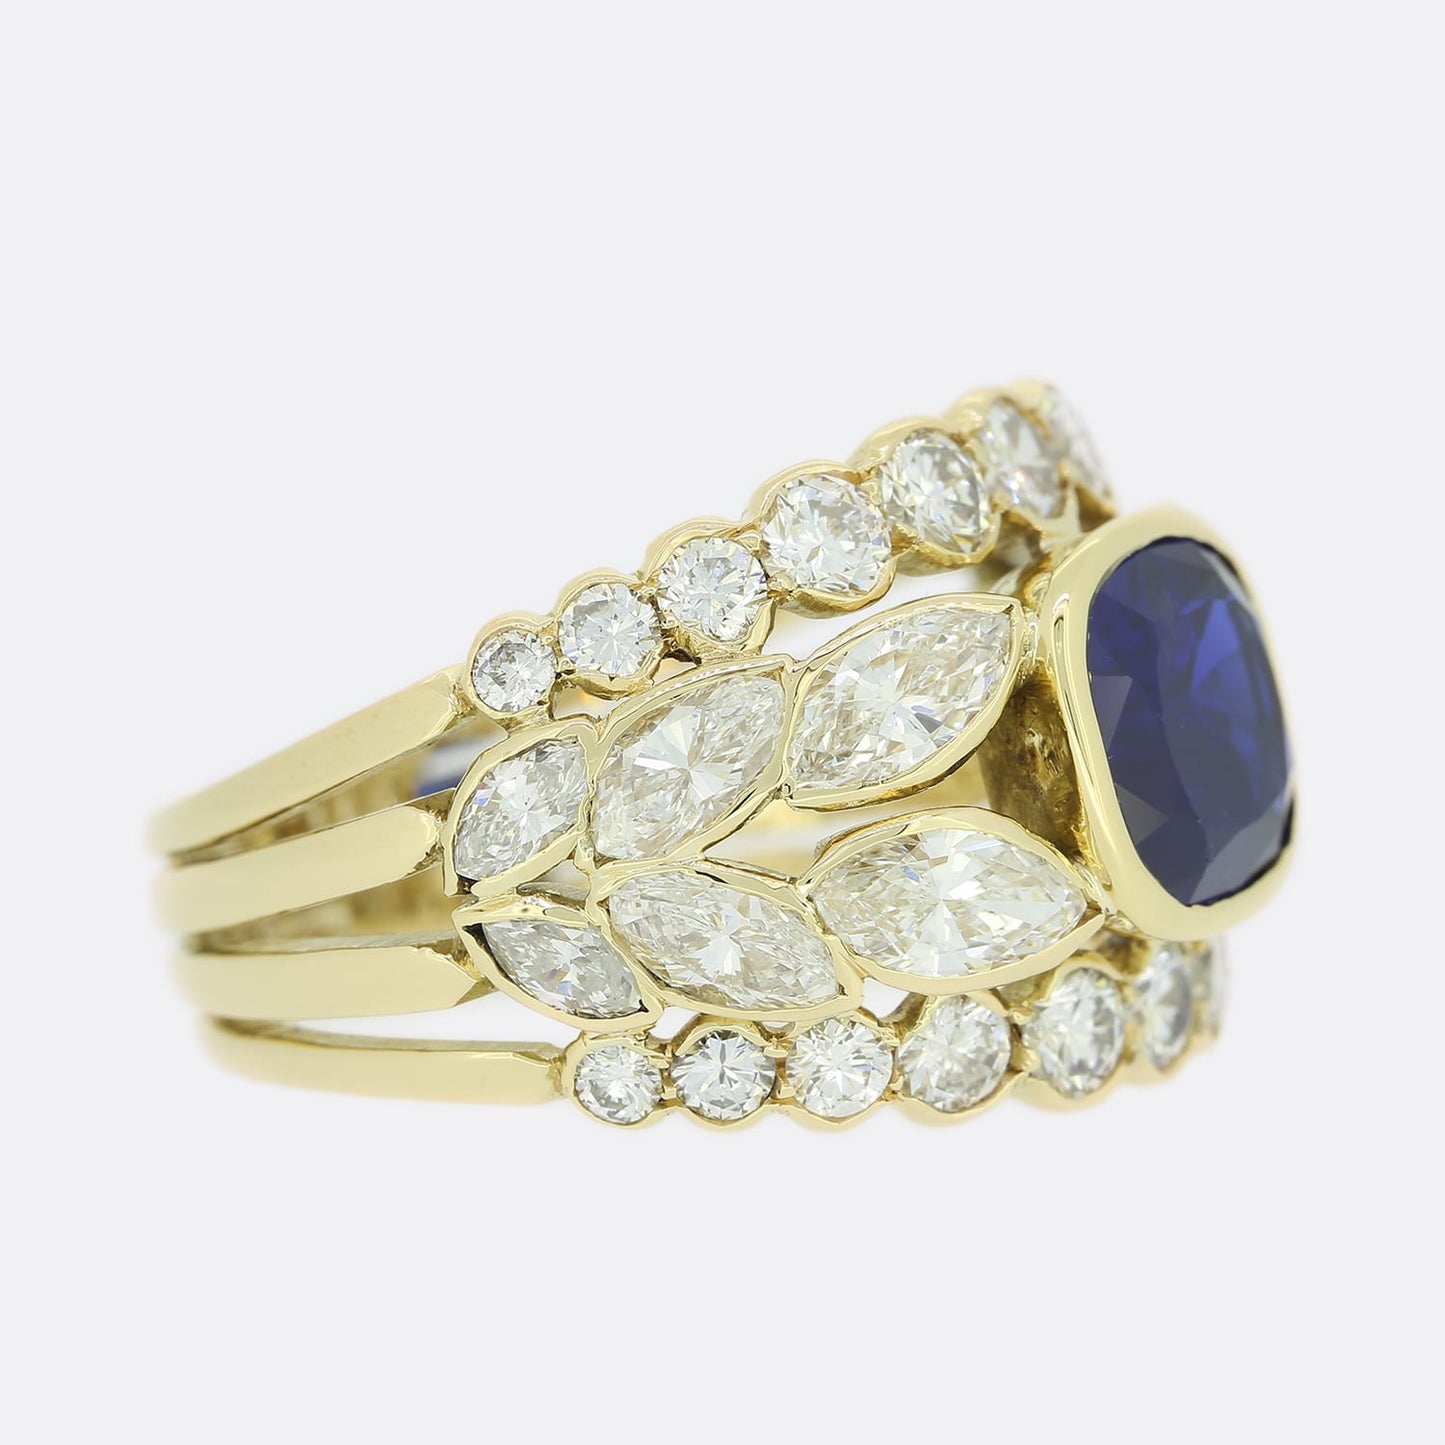 2.10 Carat Sapphire and Diamond Cluster Ring